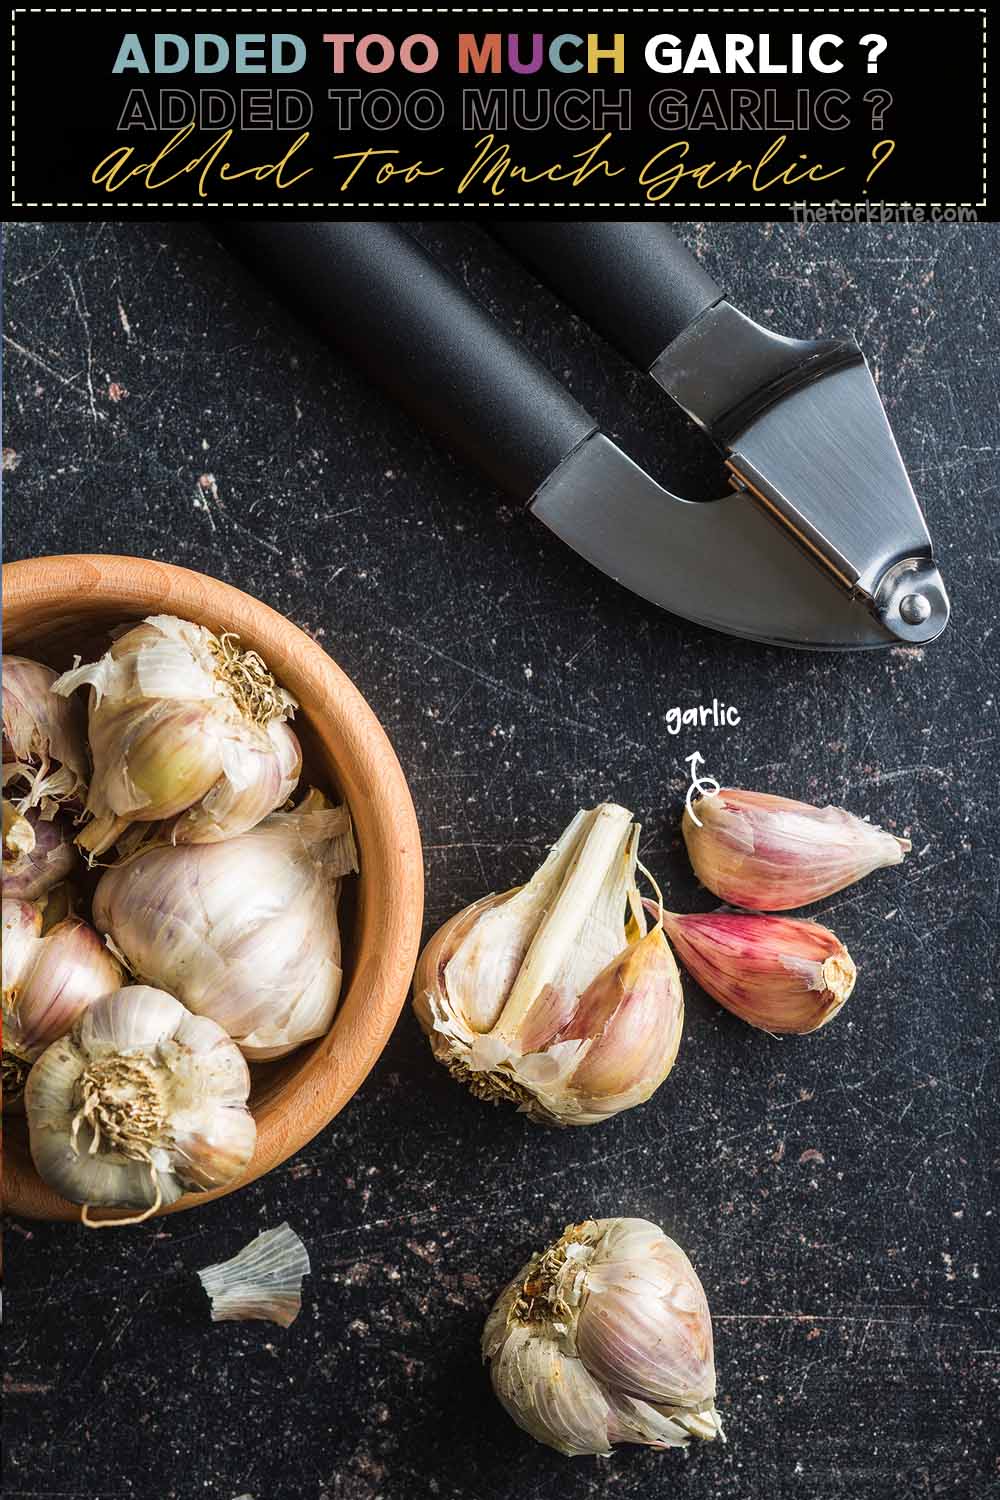 Added too much garlic? Here are the solutions on how to fix your recipe. It happens to the best of us.